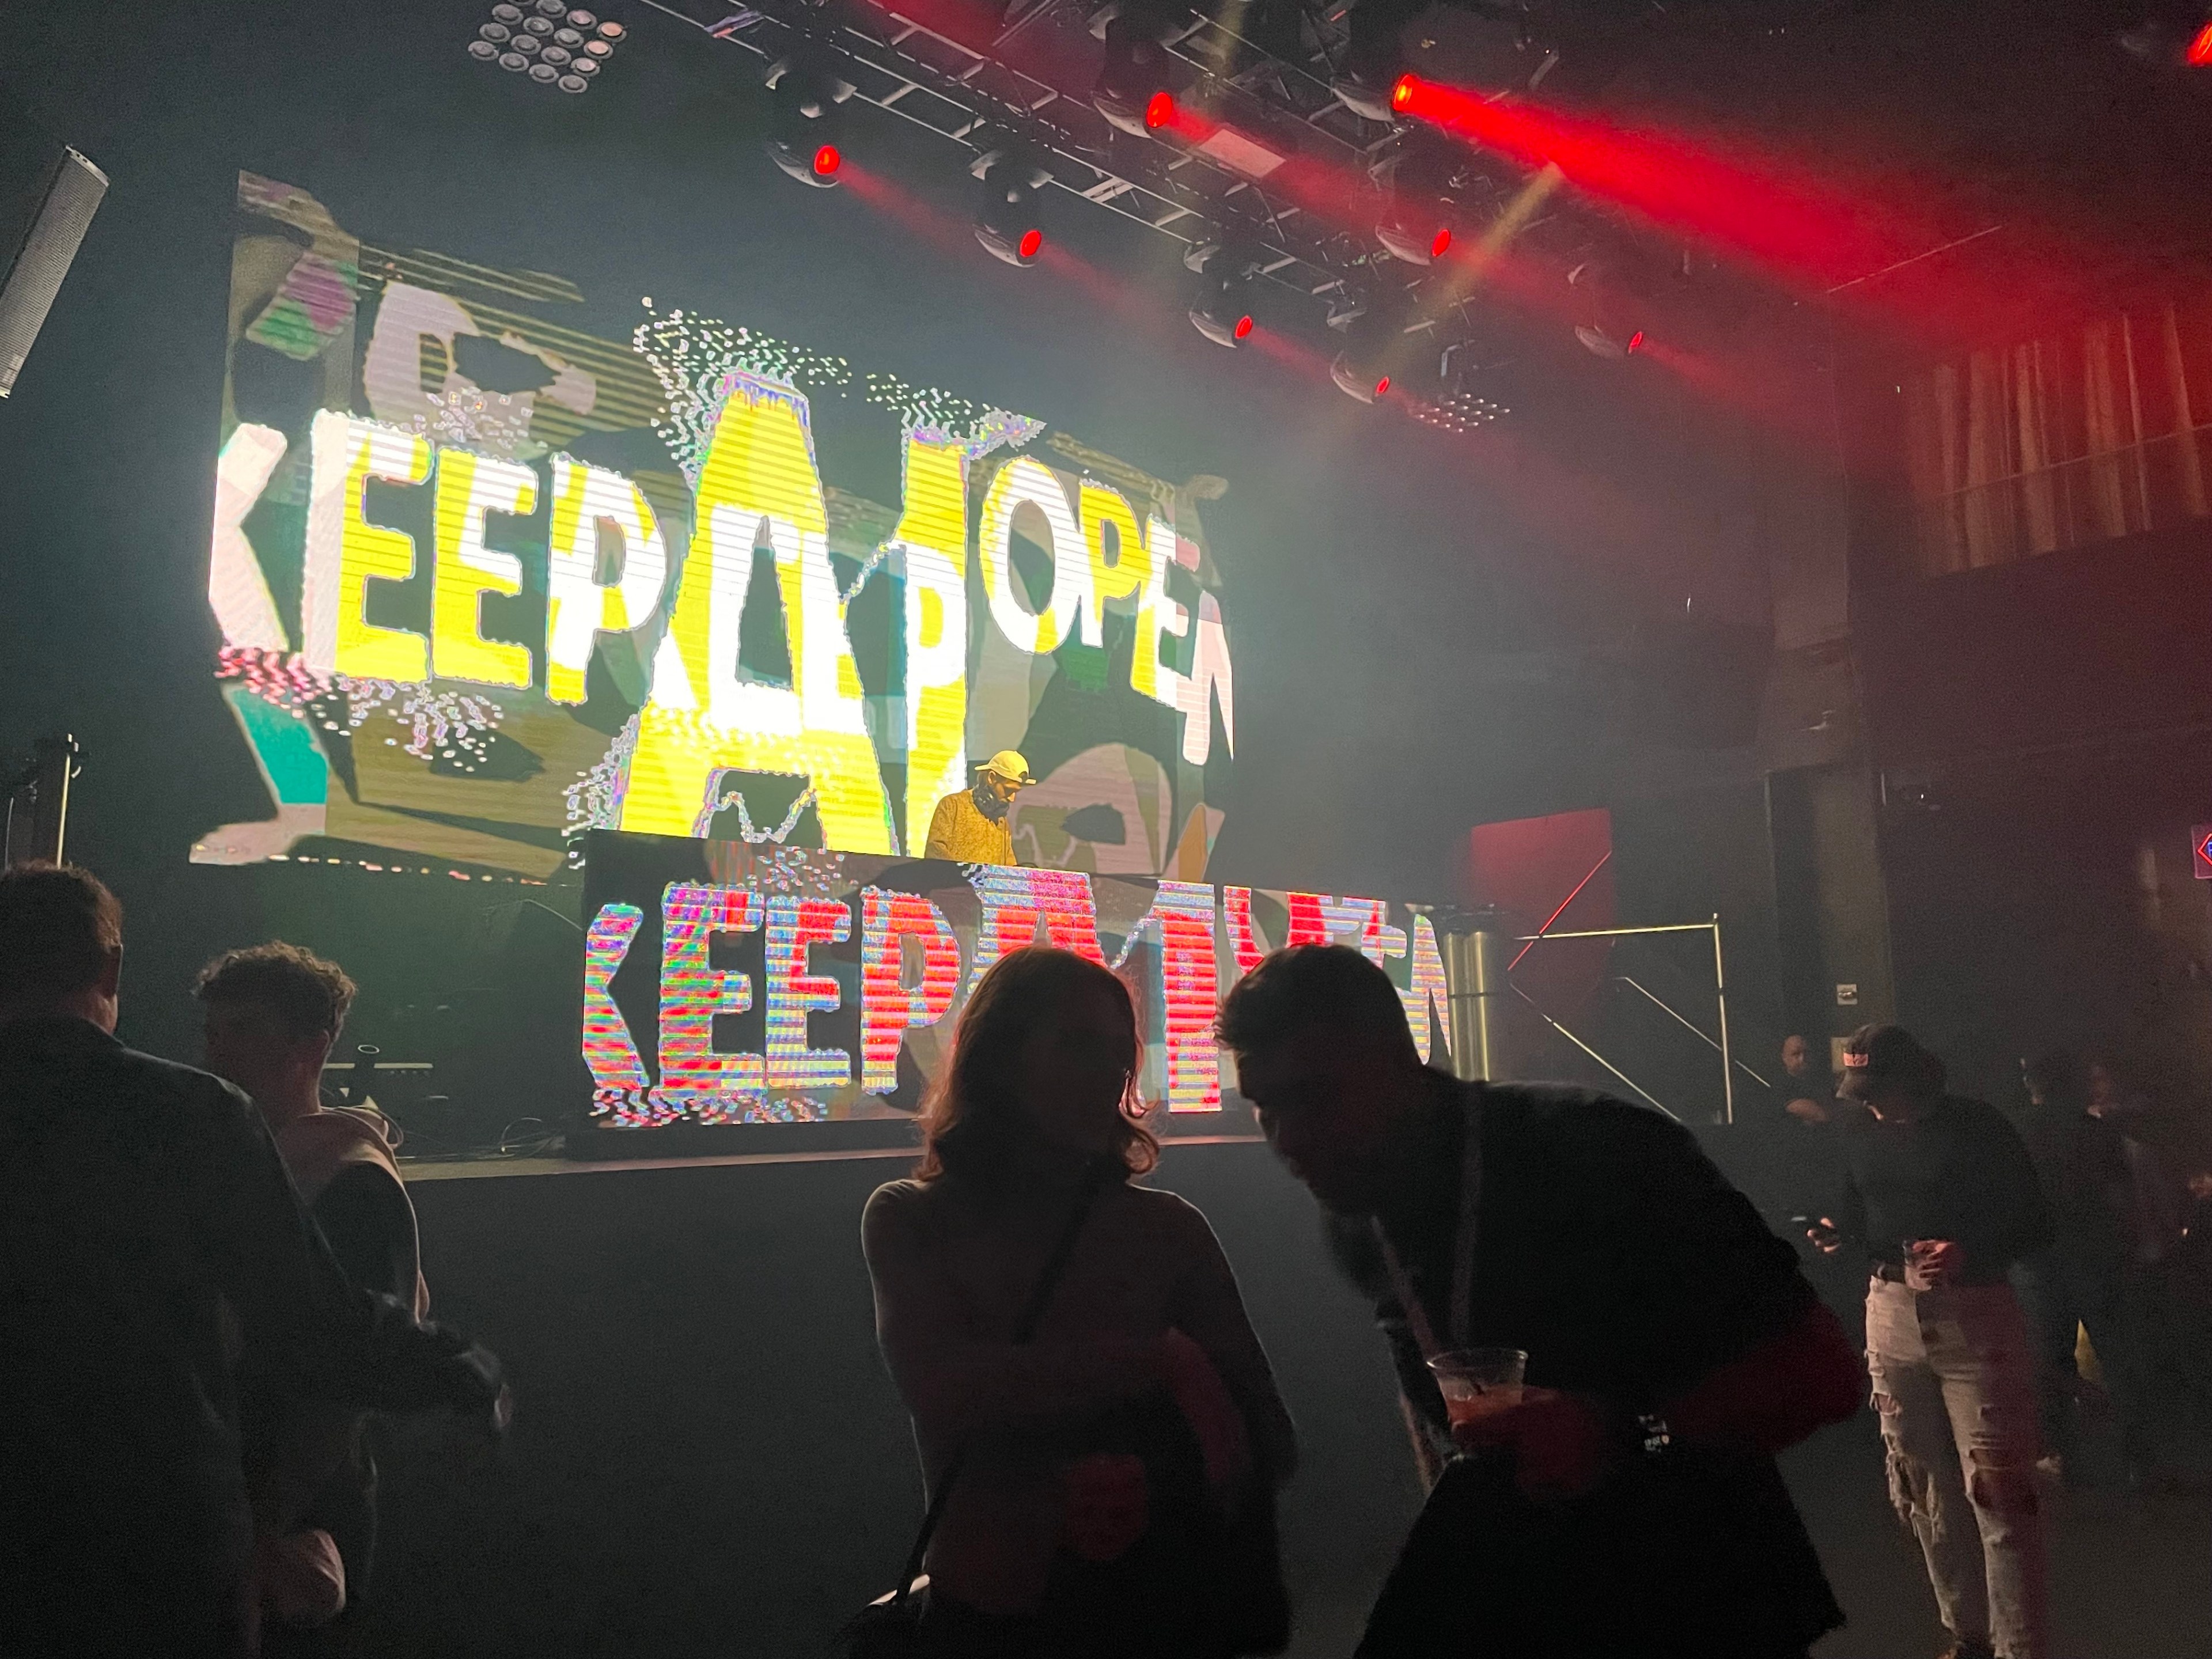 The silhouettes of several people are seen in front of a large light-up sign reading &quot;keep AI open&quot; in multi-color letters above a stage at a nightclub with spotlights shining red lights away from the stage.